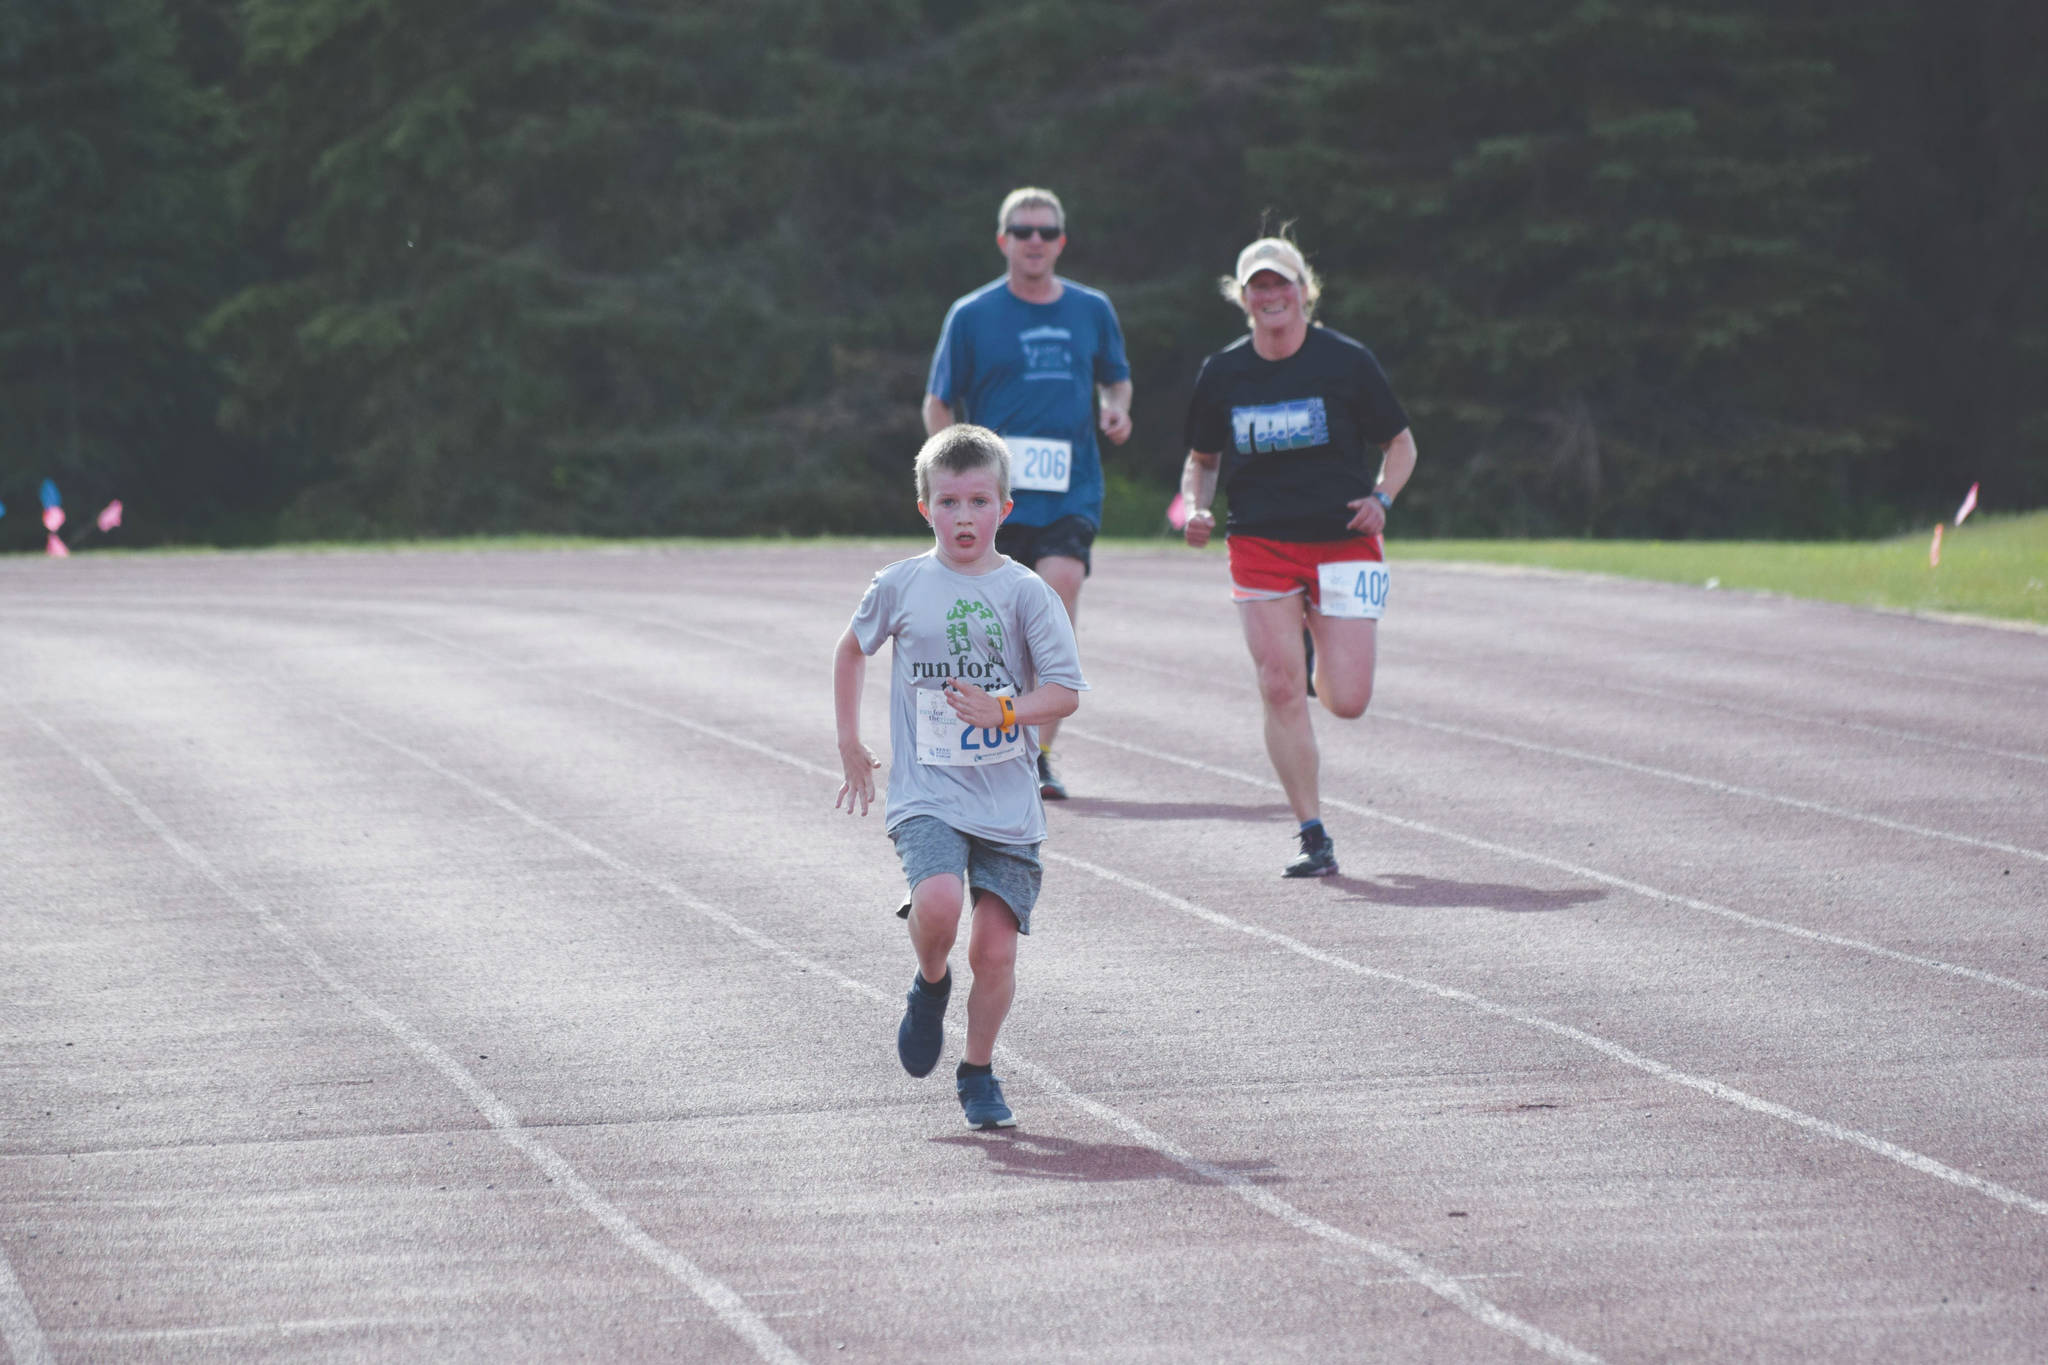 Gus Reimer crosses the finish line in front of Adam Reimer and Julie Laker during the first race of the Salmon Run Series at Skyview Middle School on Wednesday, July 7, 2021. (Camille Botello / Peninsula Clarion)